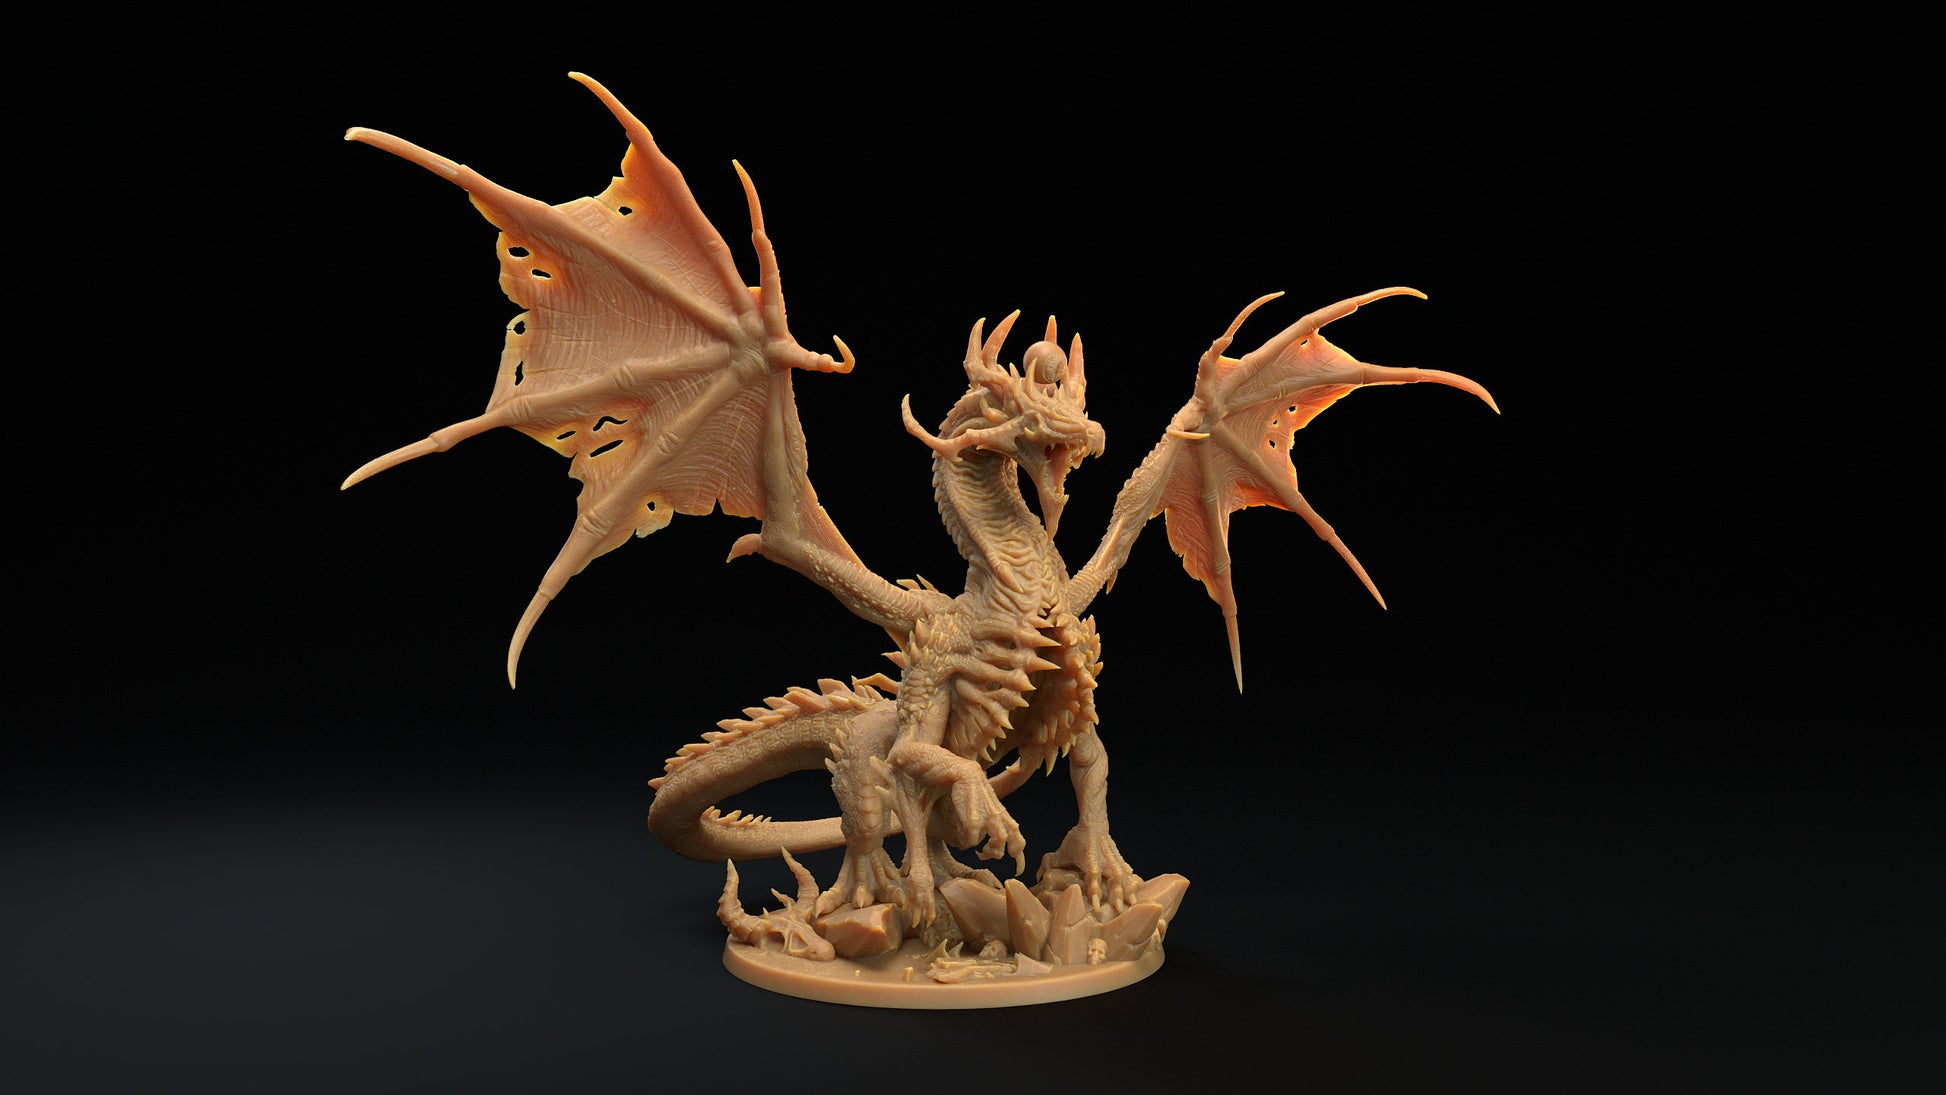 Abyssal Hellkite | RPG Miniature for Dungeons and Dragons|Pathfinder|Tabletop Wargaming | Dragon Miniature | Dragon Trappers Lodge